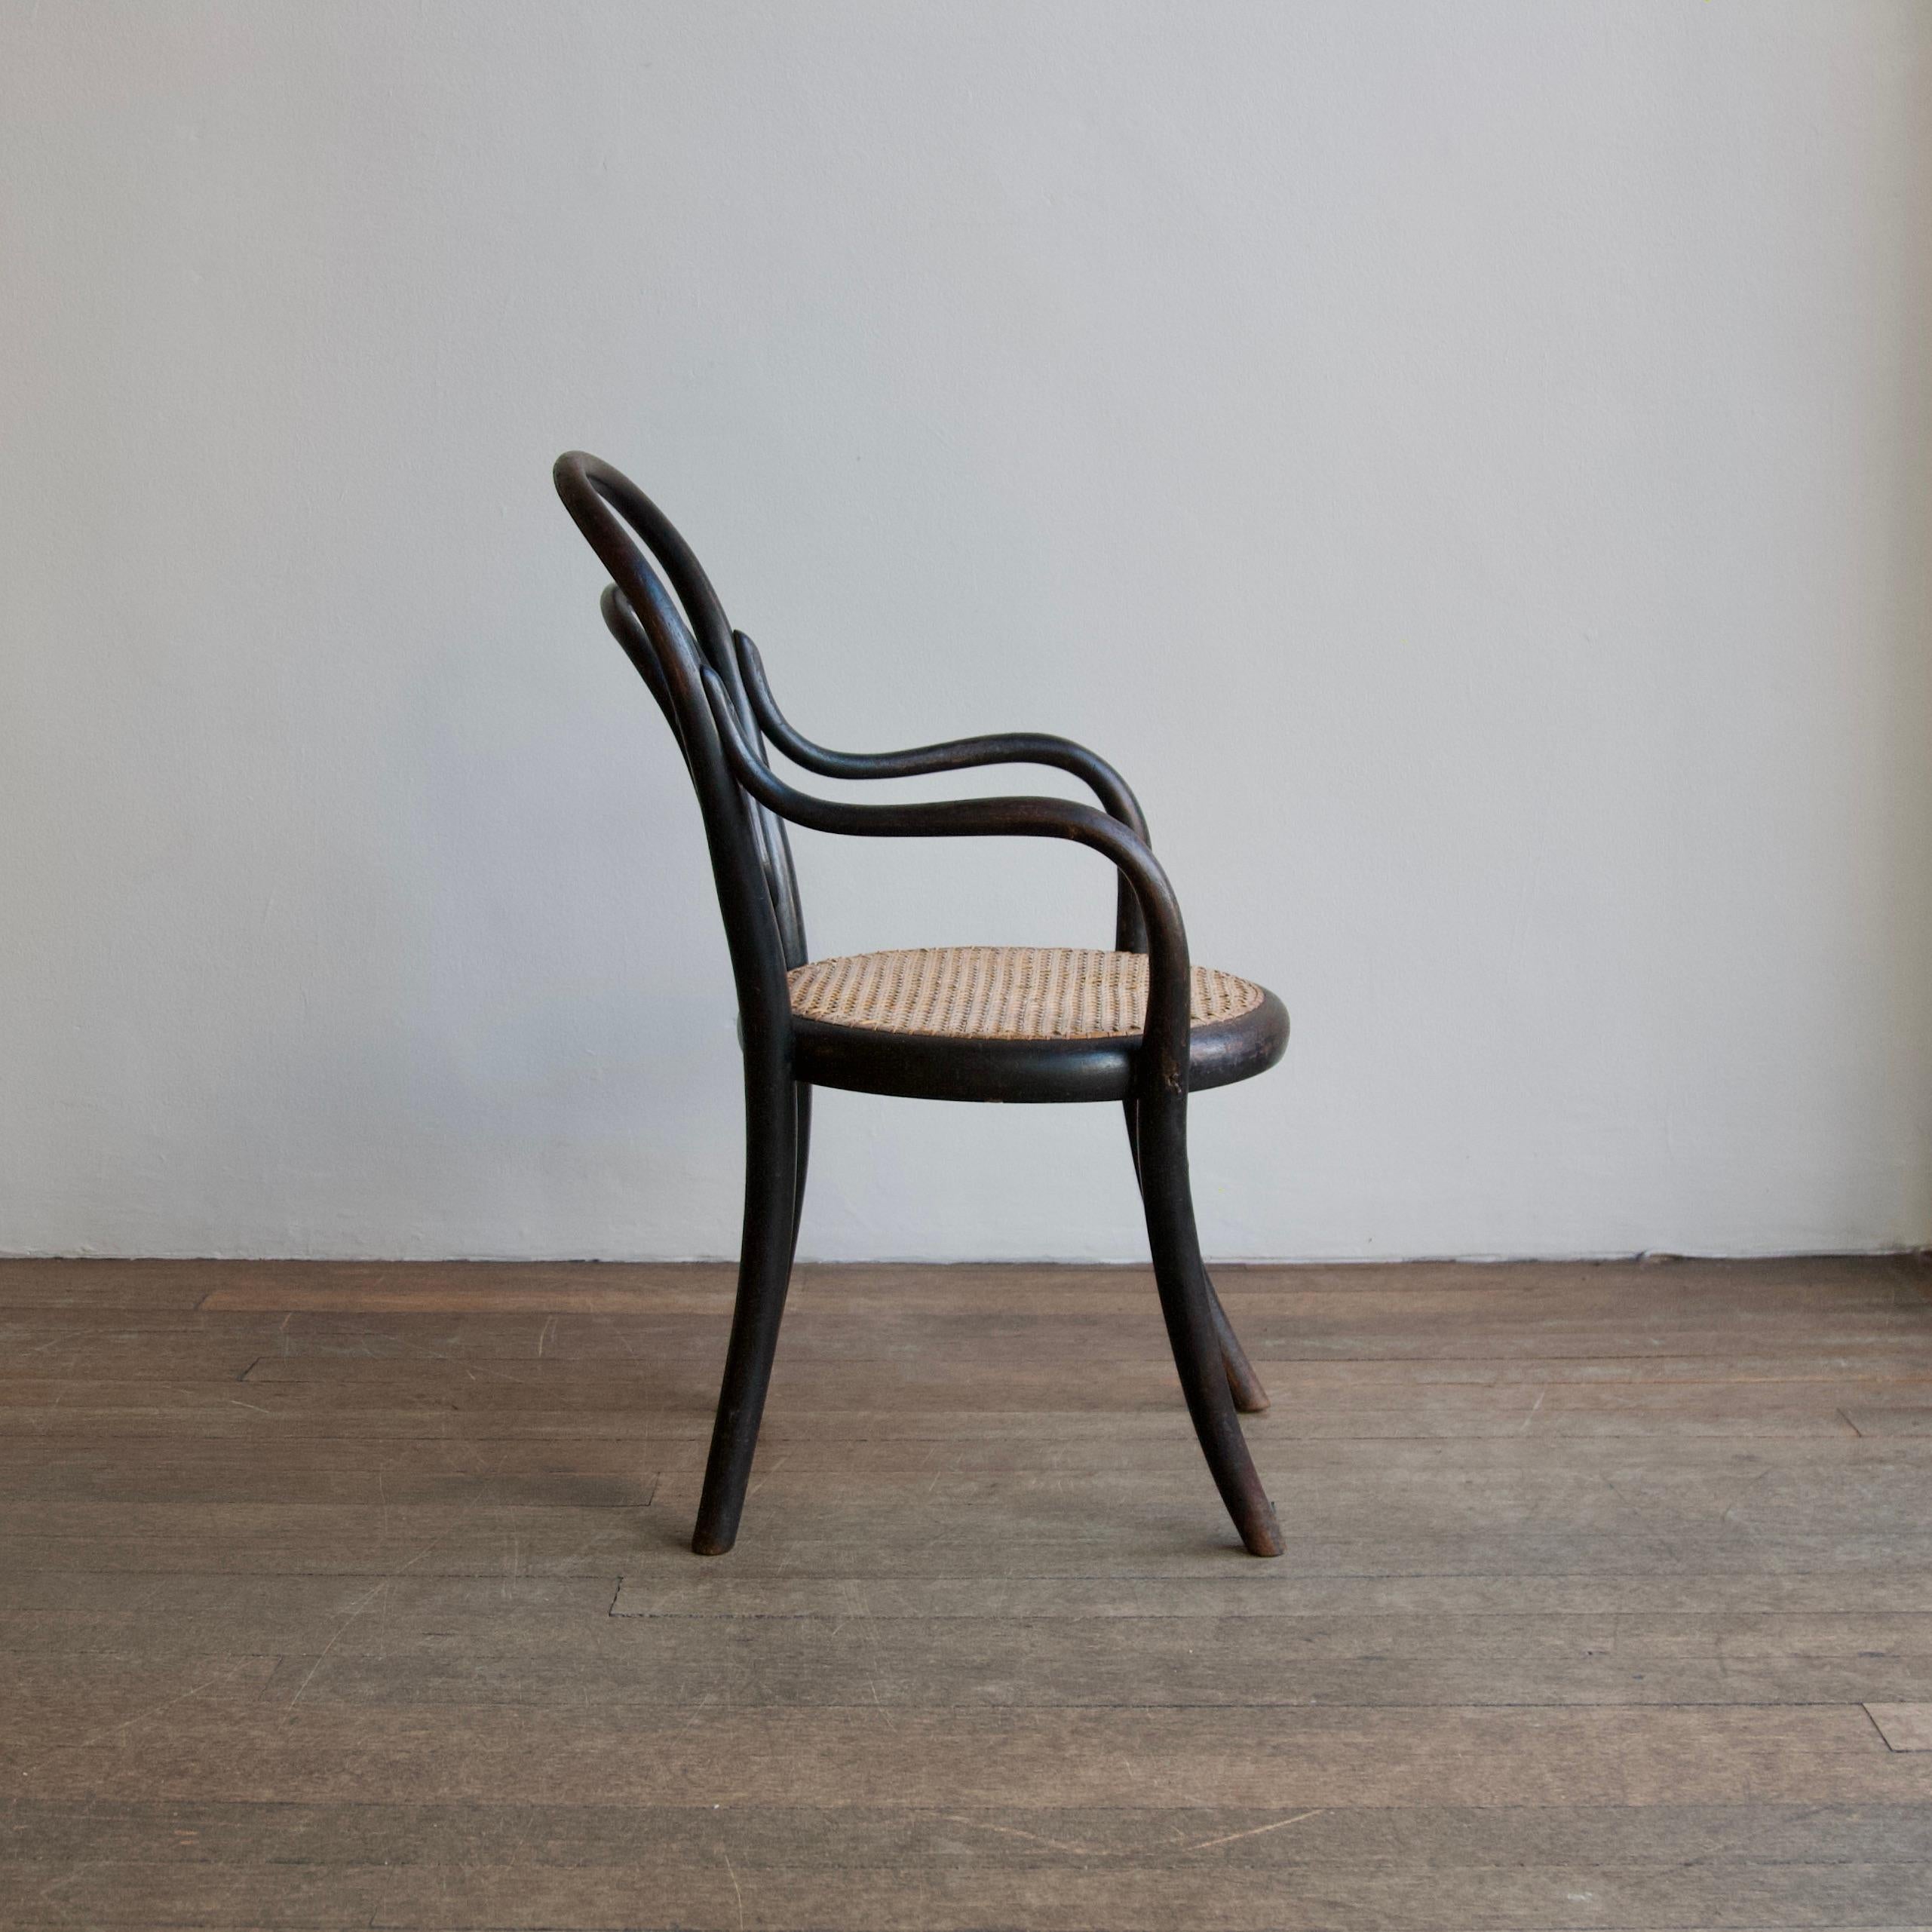 A bentwood and cane child’s armchair in black lacquer by Thonet, Austria.

The chair features all of the attributes associated with the iconic Thonet design vernacular. All of the structural elements from the legs to the backrest have been expertly